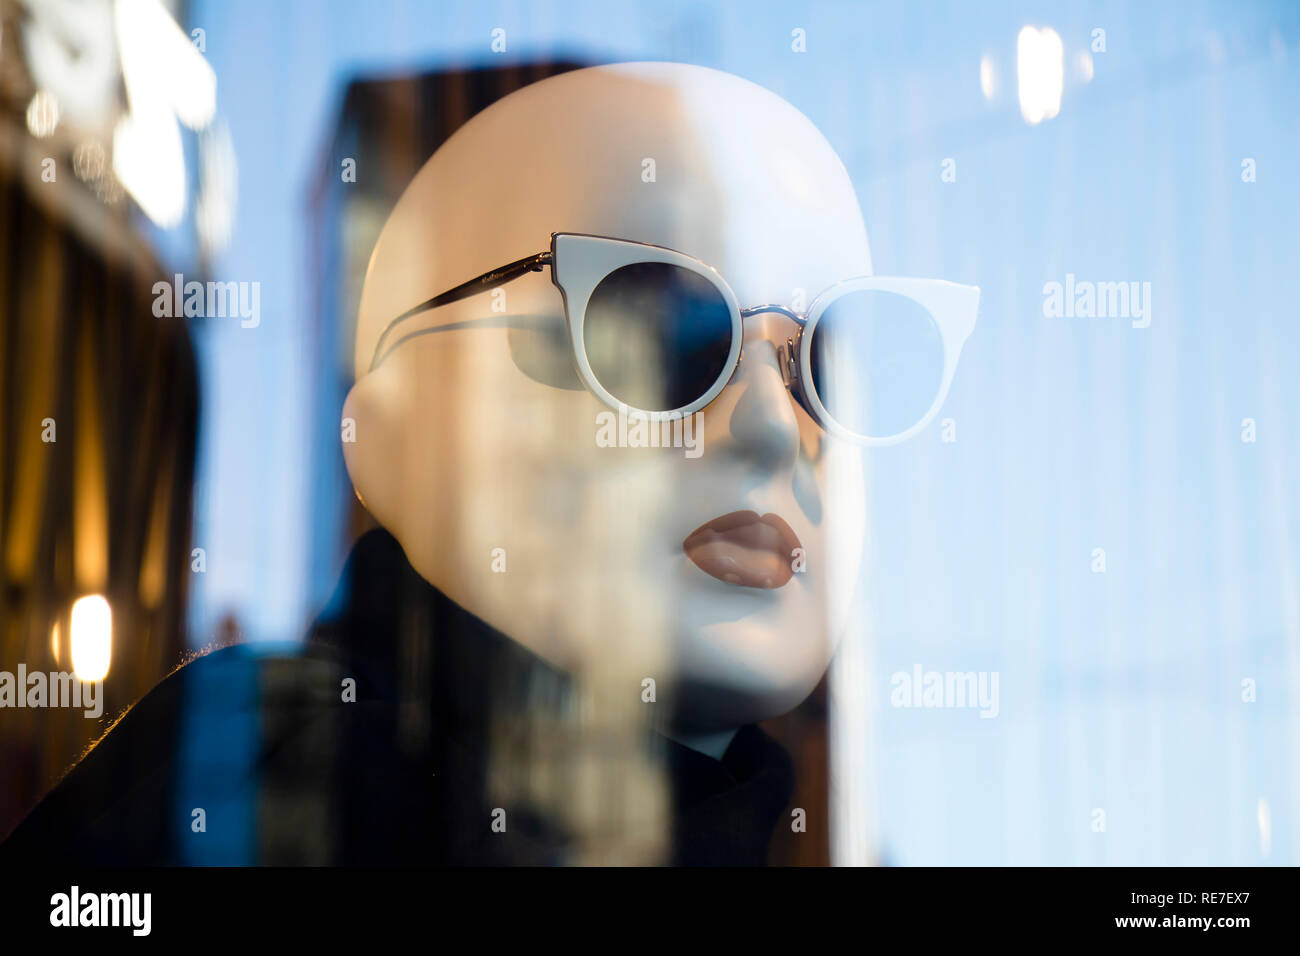 Belgrade, Serbia - Januar 17, 2019: One mannequin doll with sun glasses displayed n the shop window of Max Mara clothing expensive and elegant brand w Stock Photo